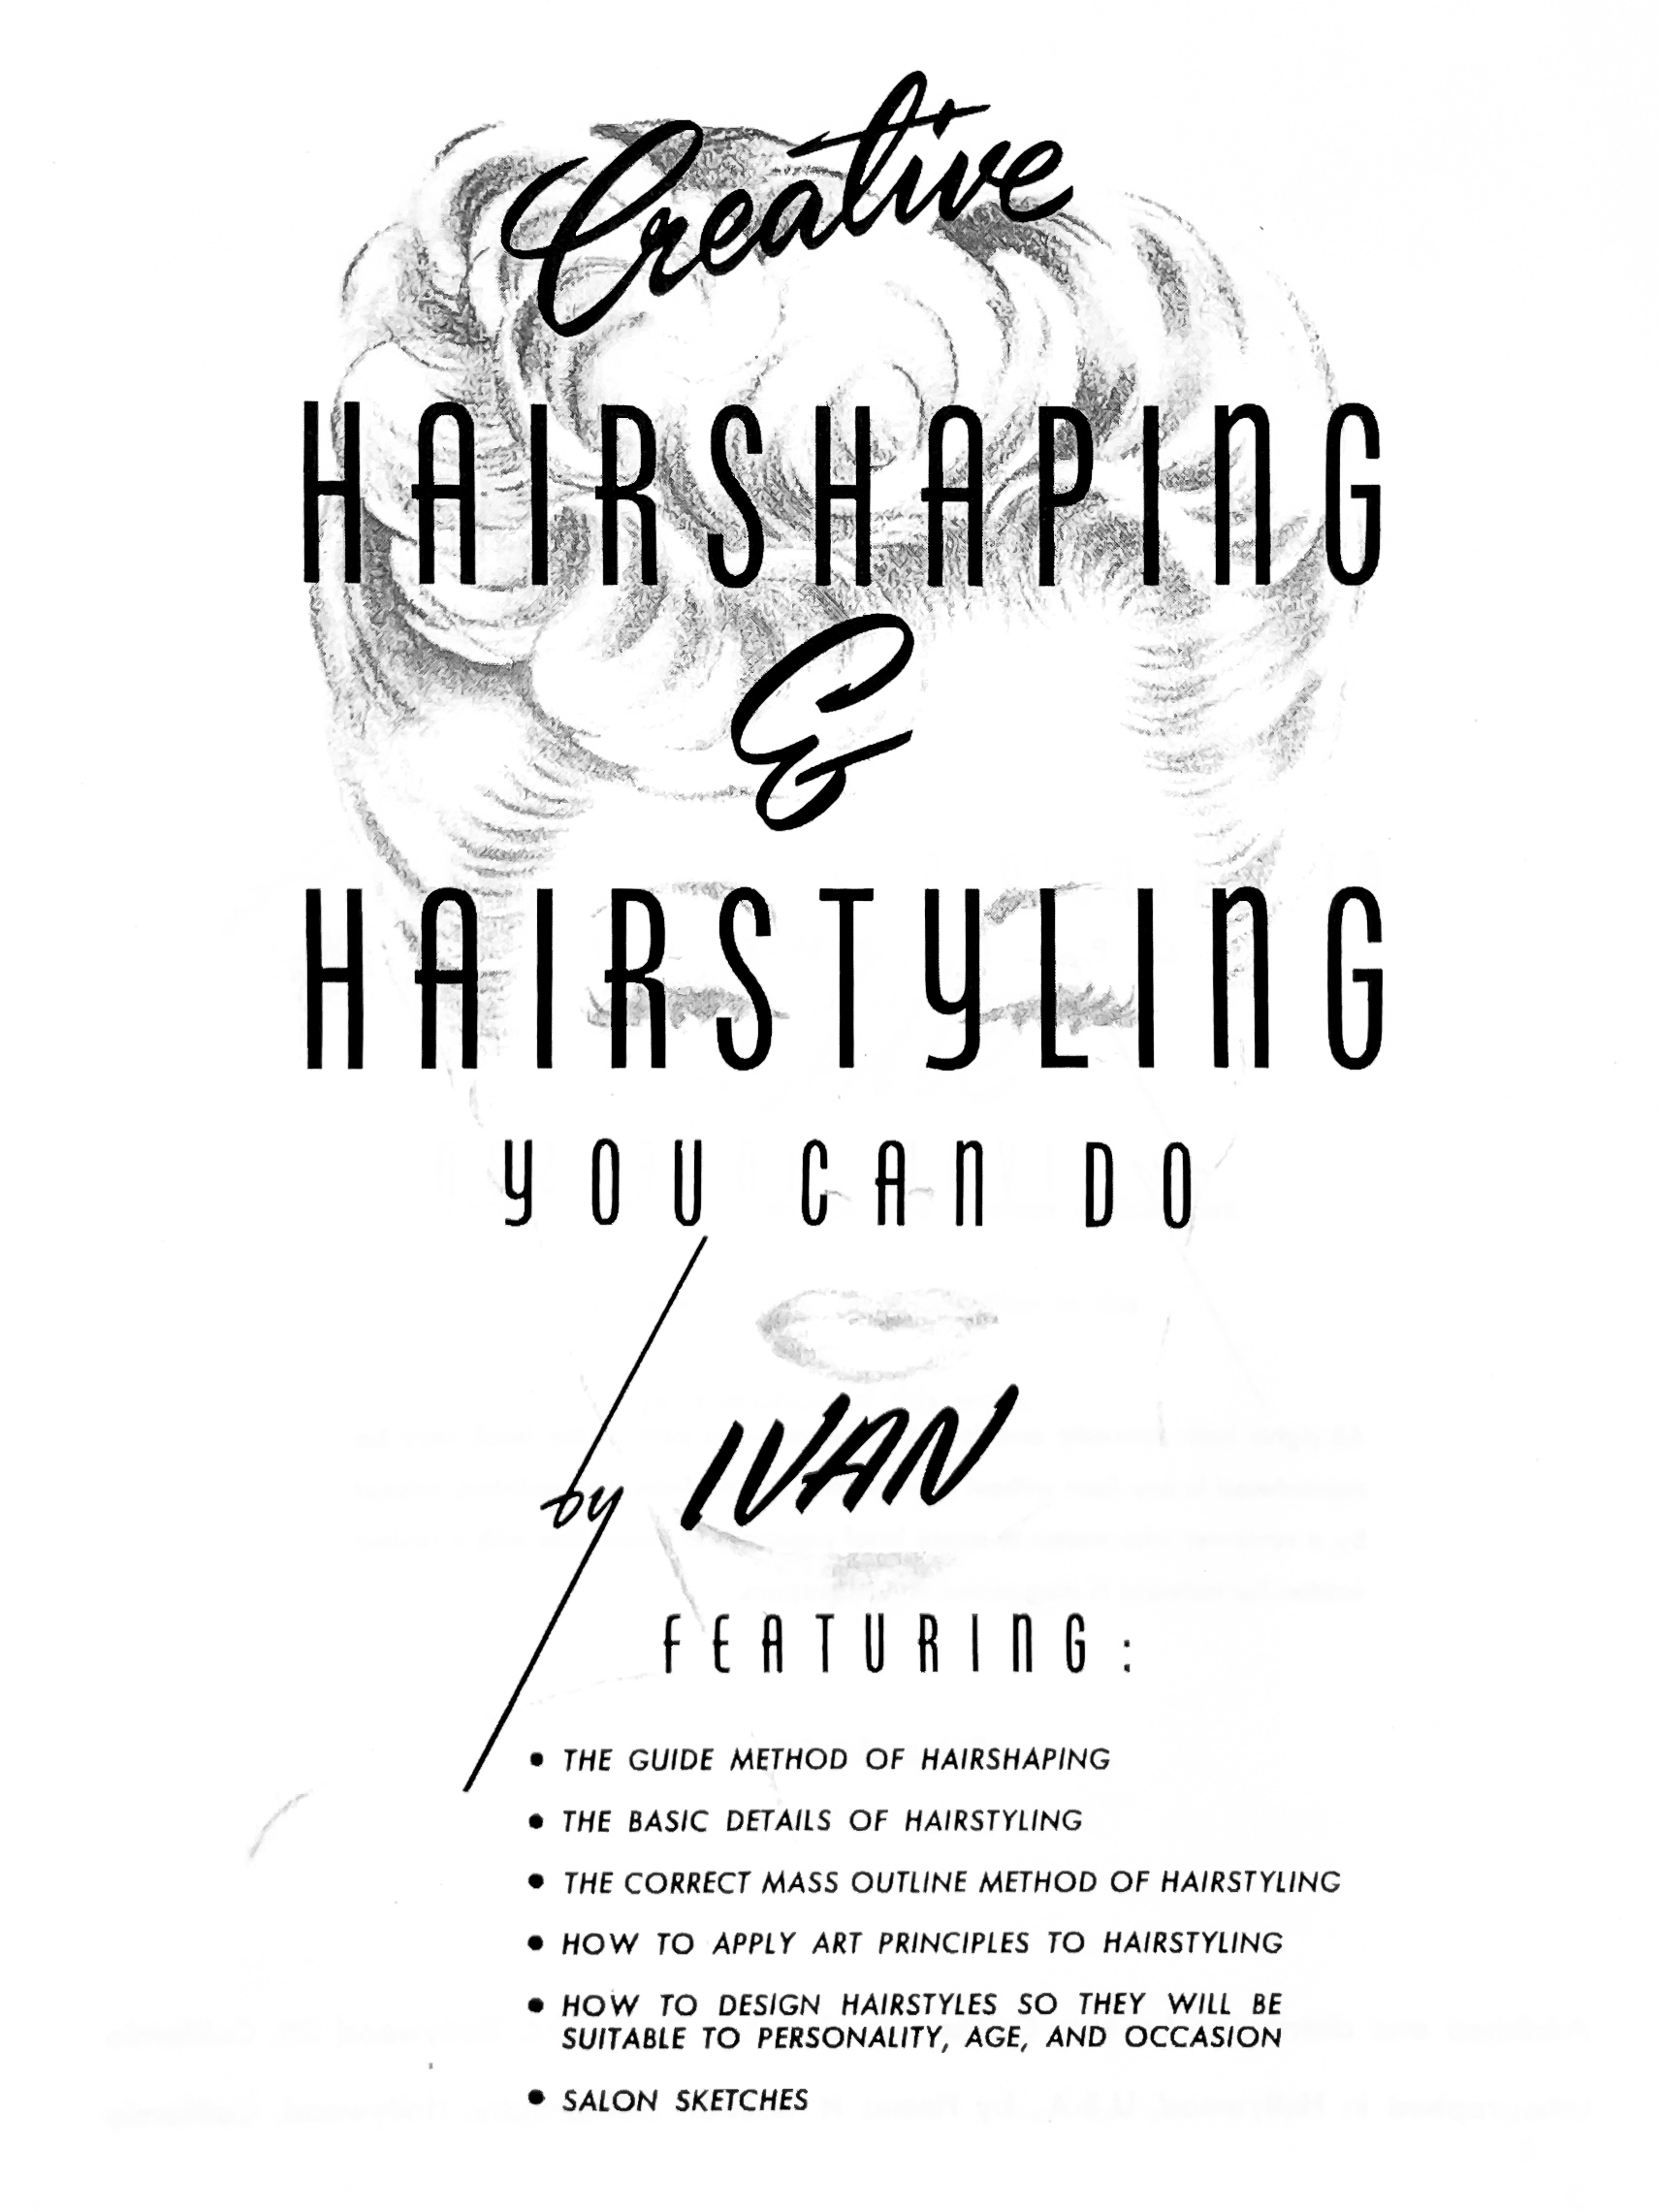 Vintage Hairstyling You Can Do (Full Book PDF) - moto glam